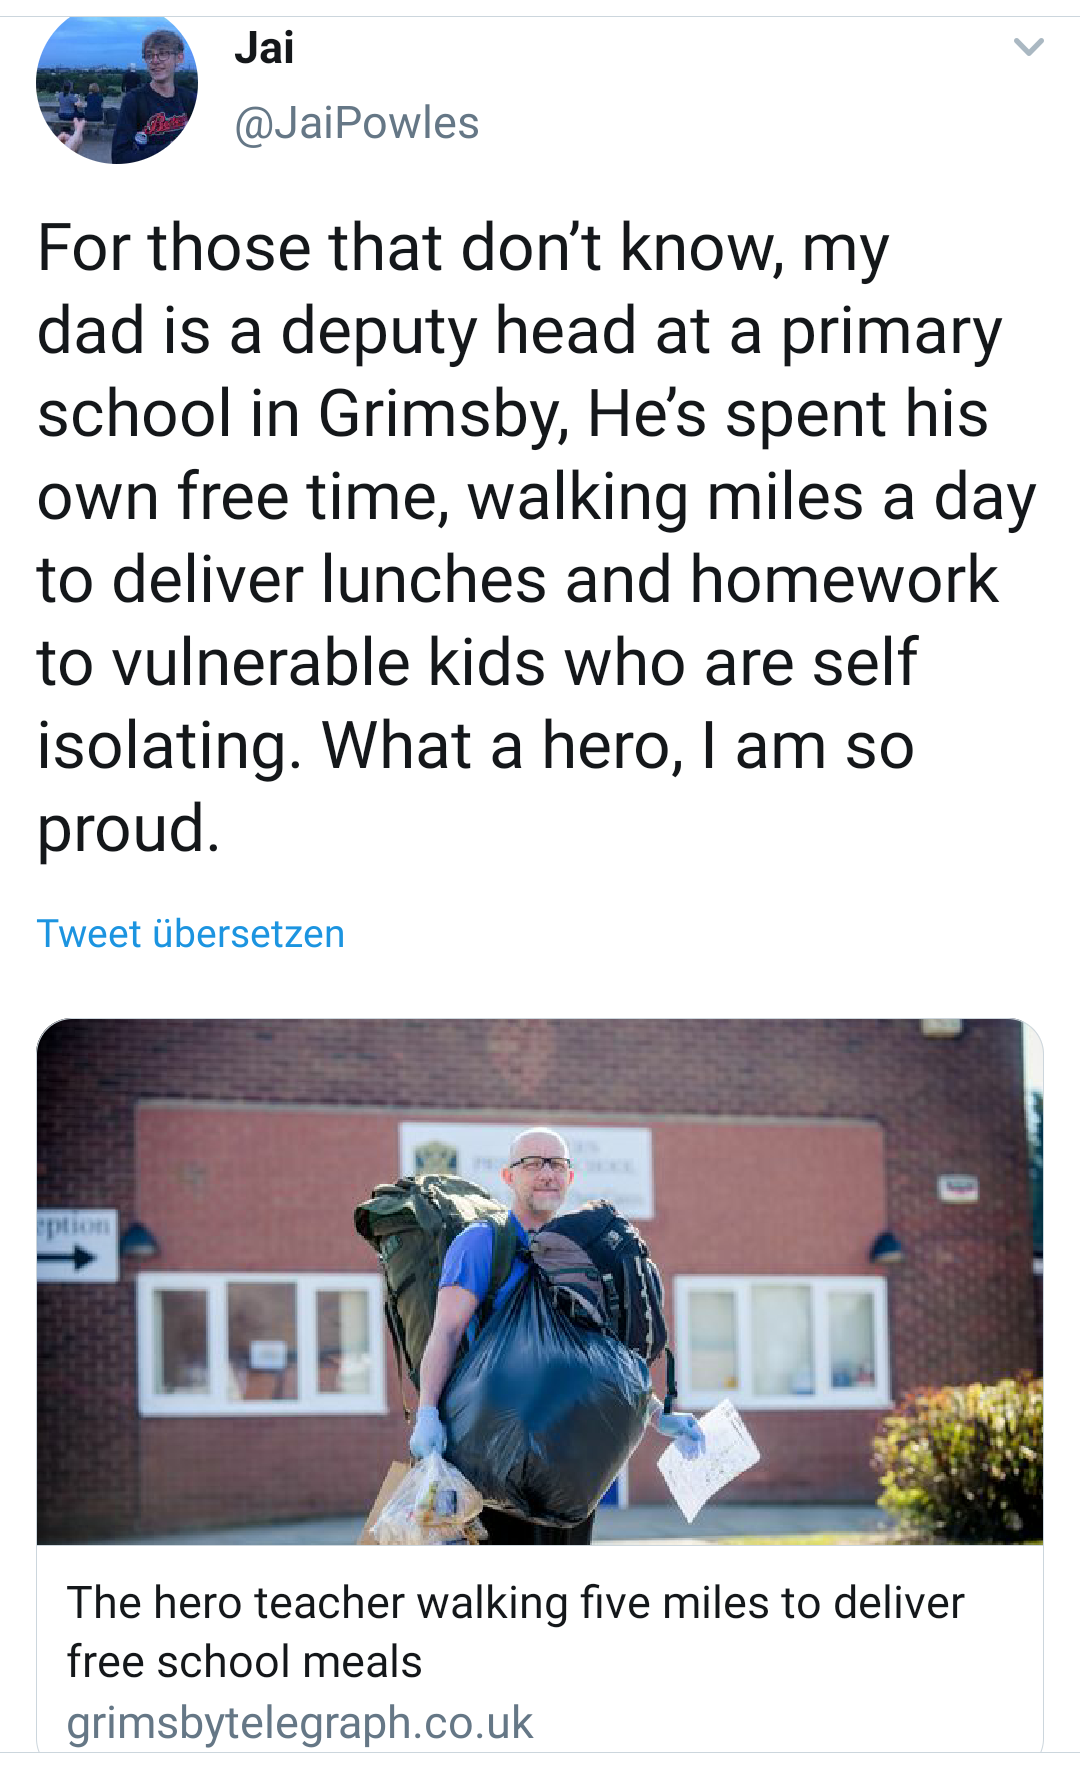 media - Jai For those that don't know, my dad is a deputy head at a primary school in Grimsby, He's spent his own free time, walking miles a day to deliver lunches and homework to vulnerable kids who are self isolating. What a hero, I am so proud. Tweet b